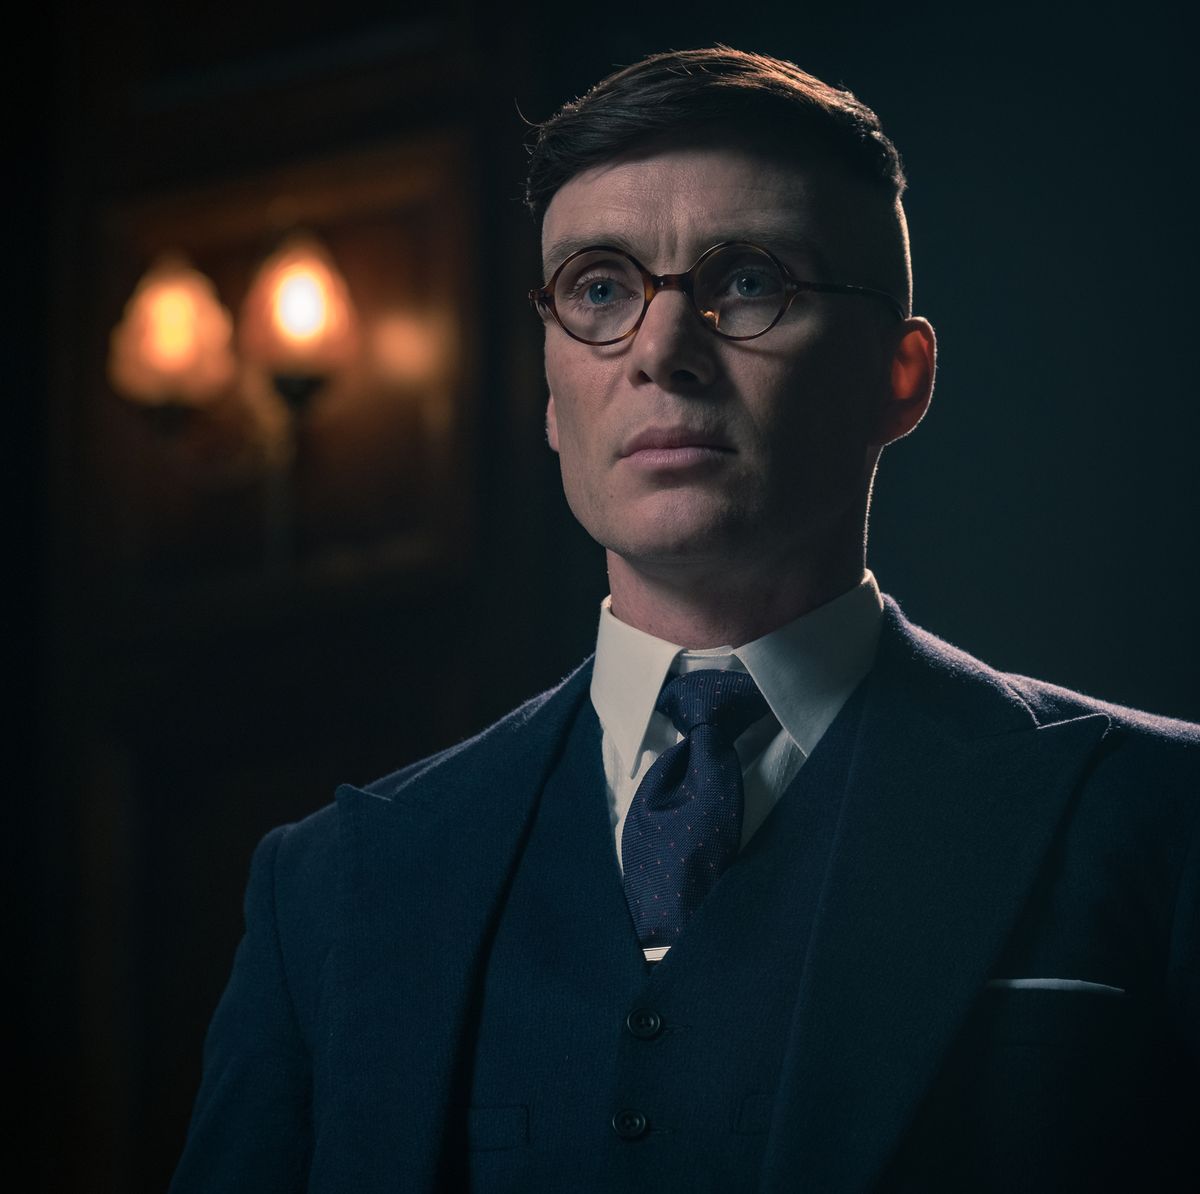 Peaky Blinders resumes filming but will end after Series 6 - Radio X